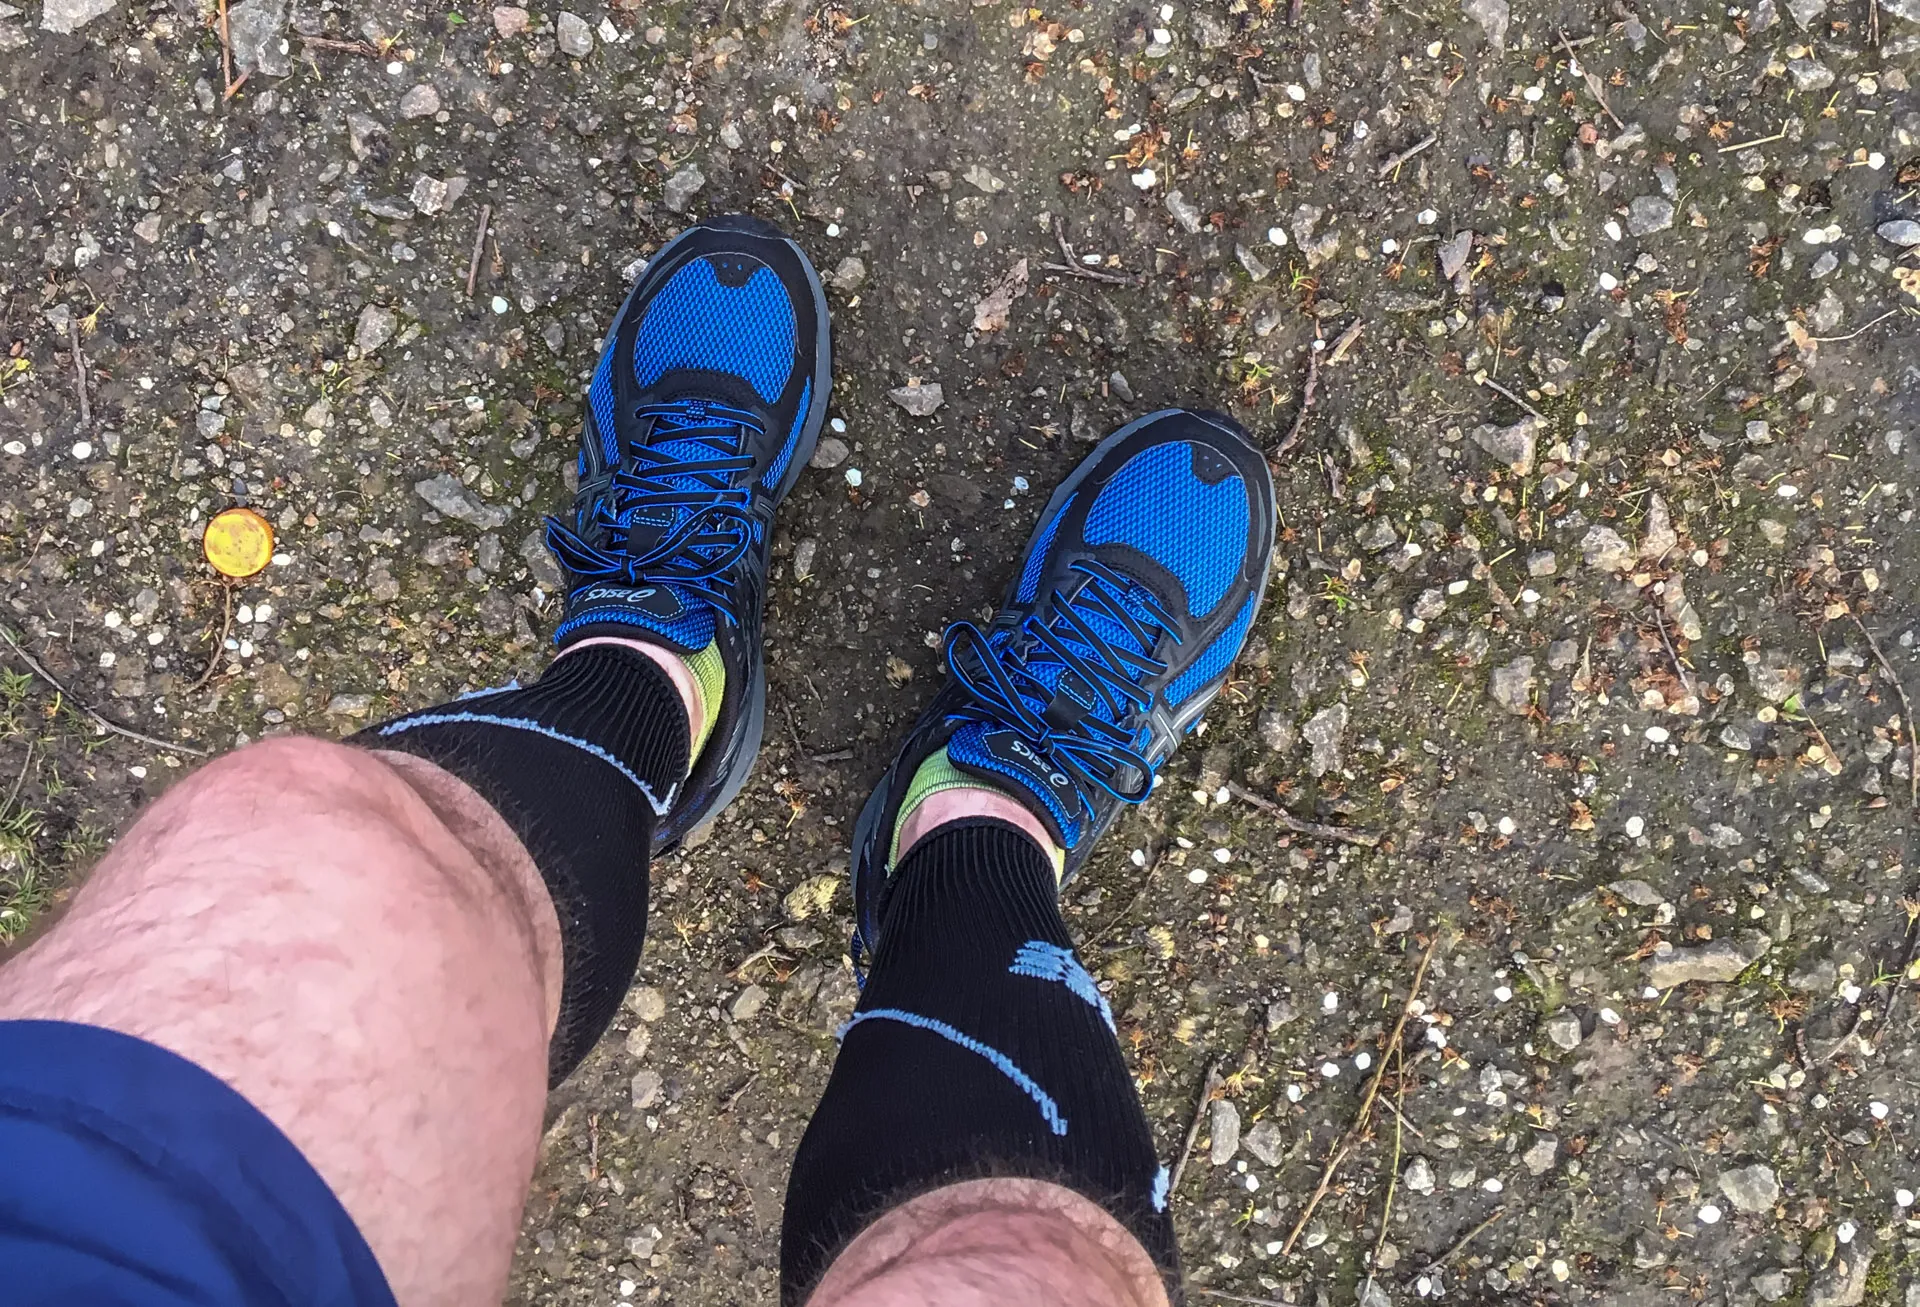 My new, blue ASICS Gel Venture 6, already tested in muddy park!